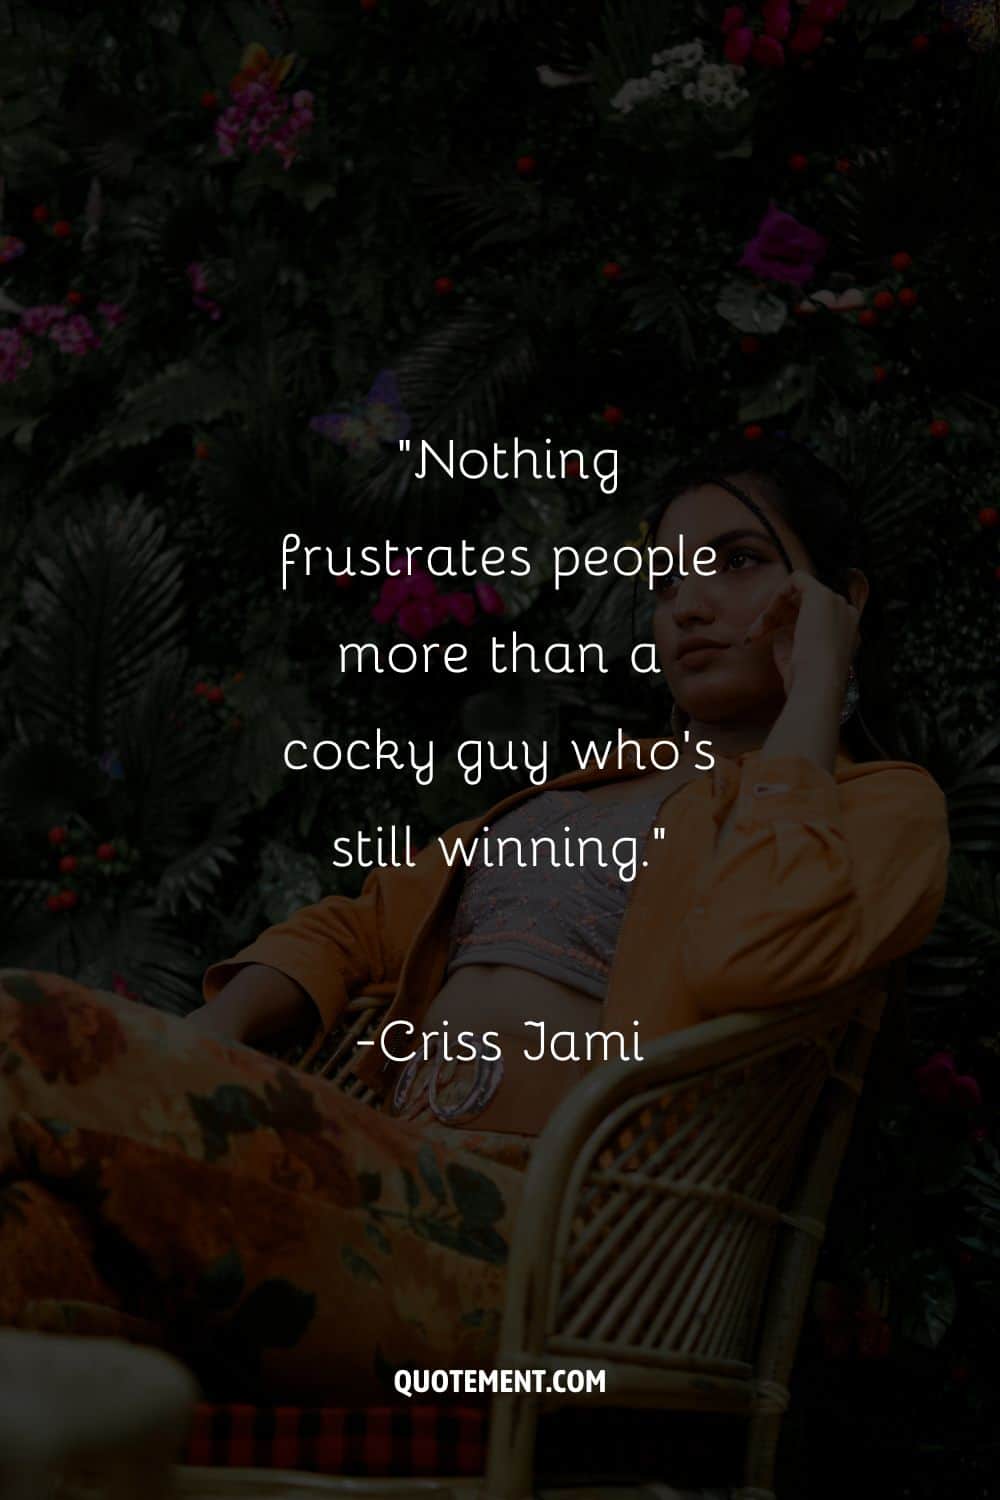 “Nothing frustrates people more than a cocky guy who's still winning.” ― Criss Jami, Healology